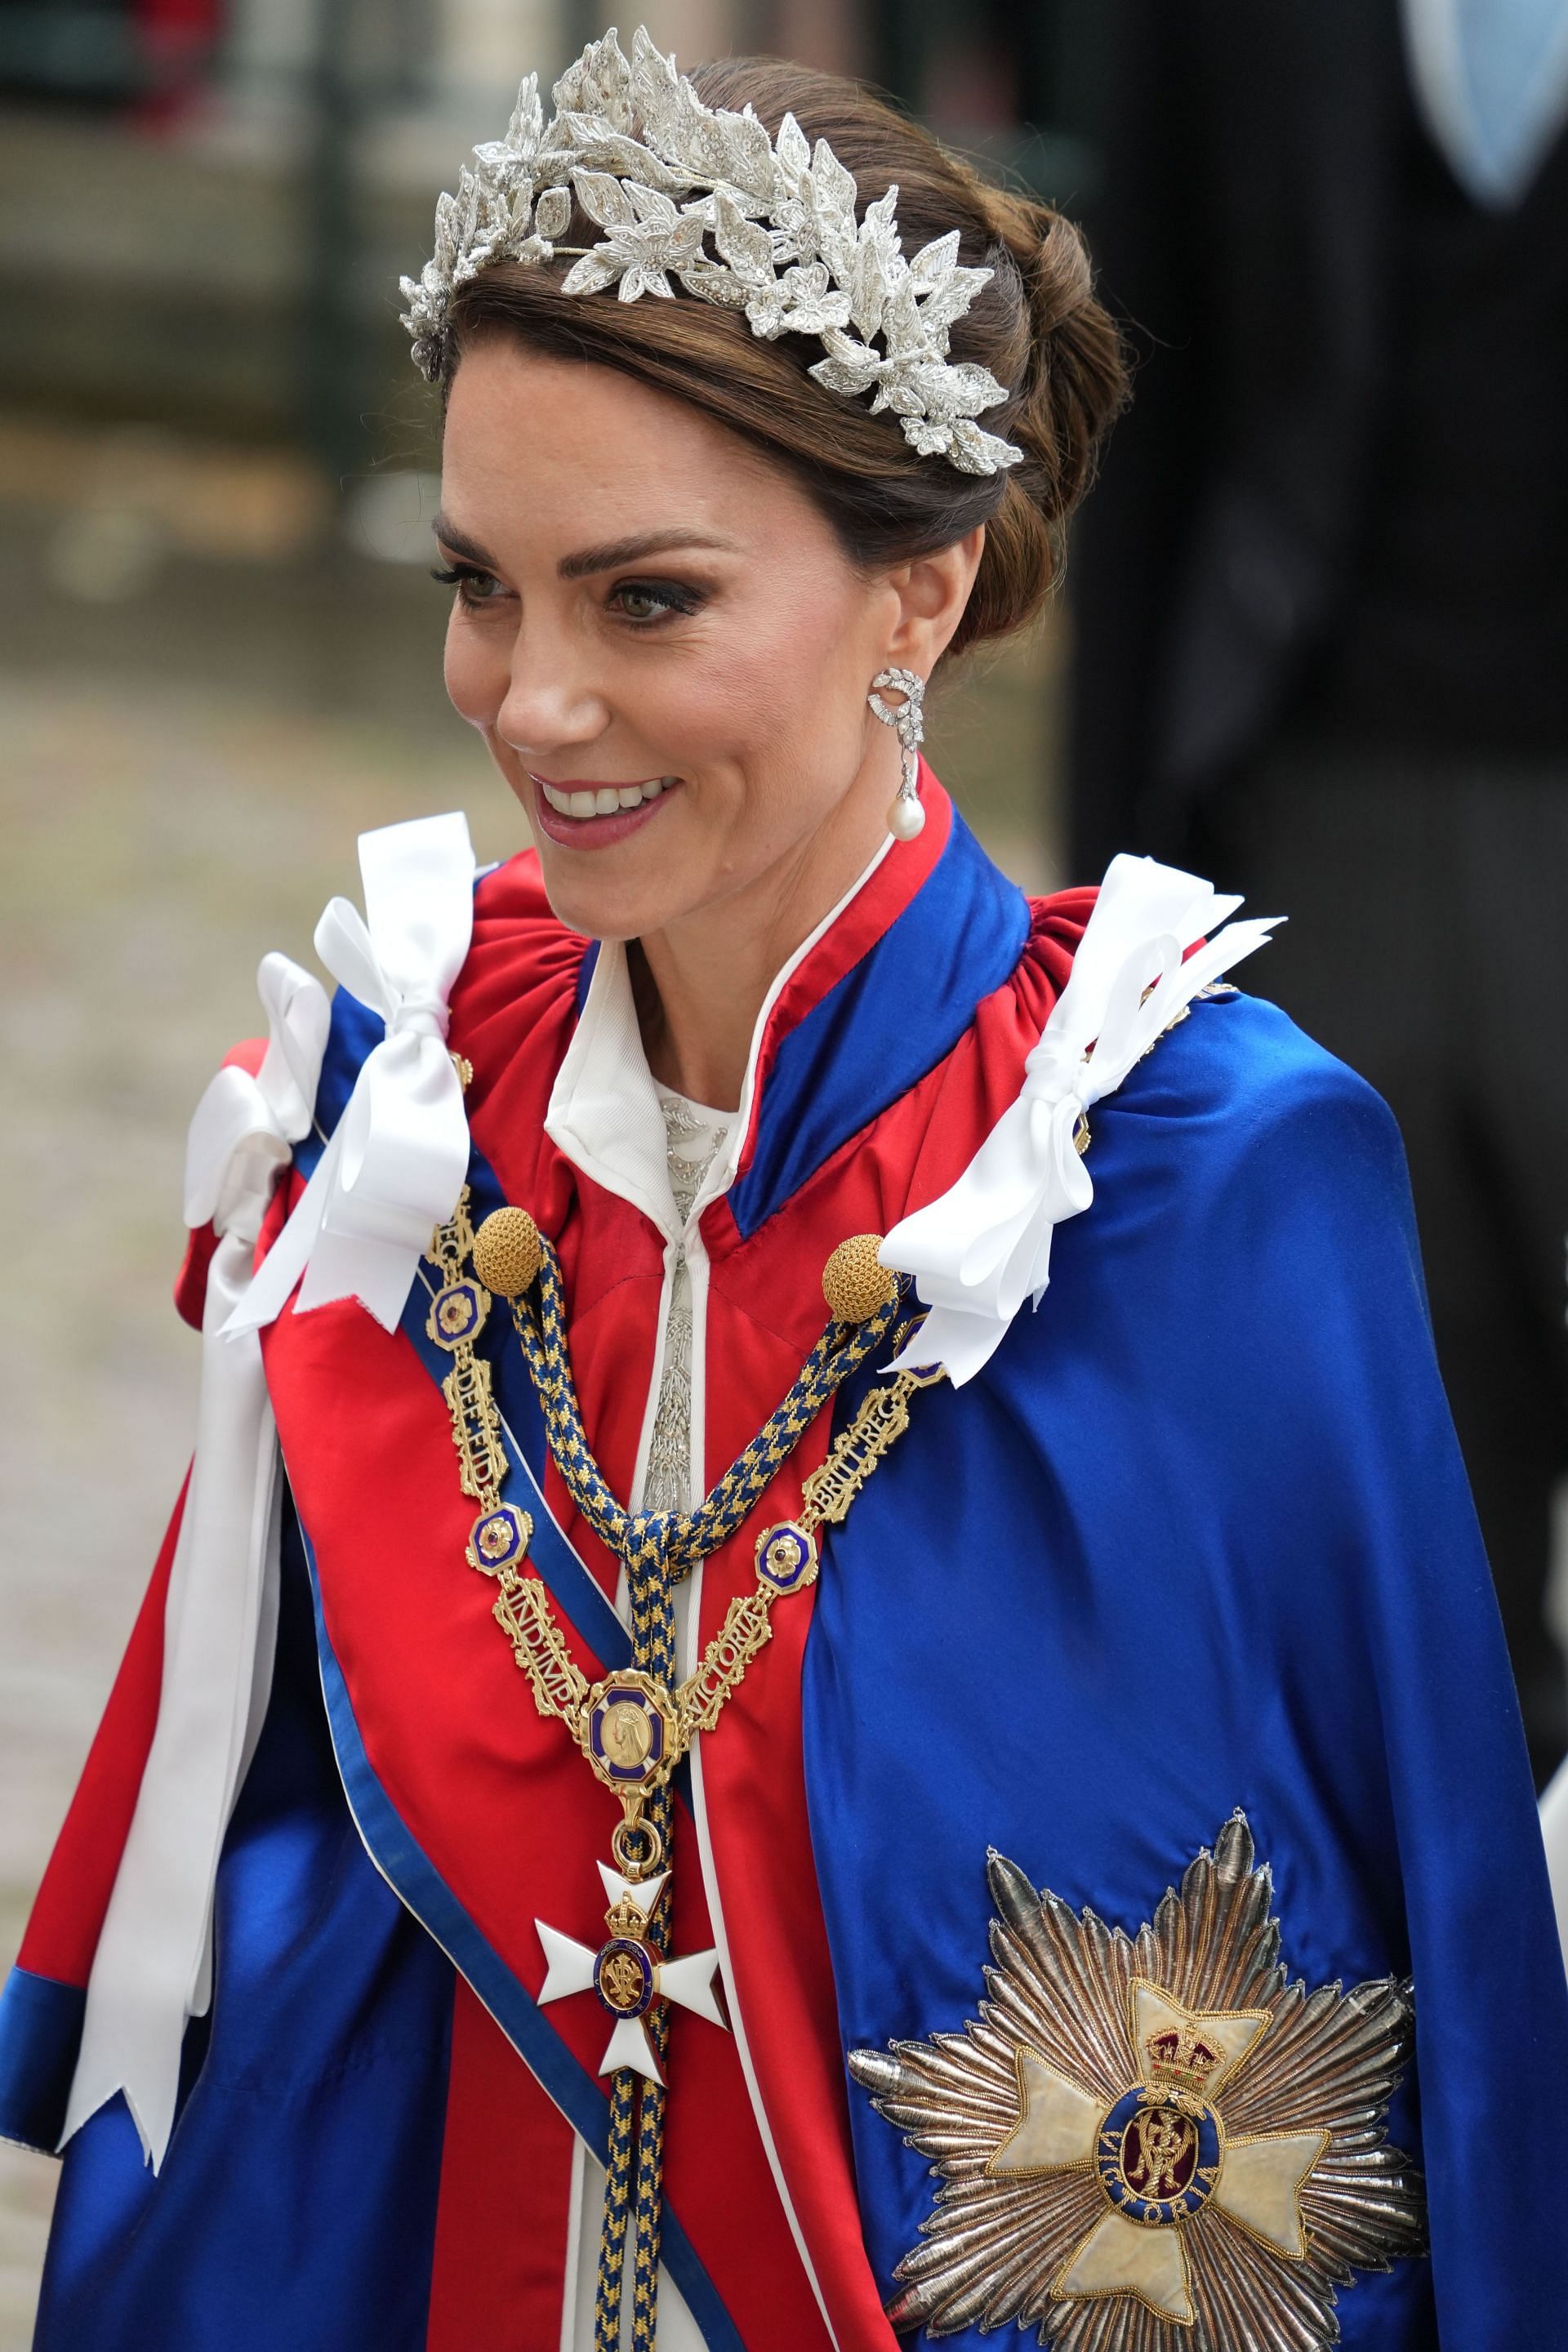 Princess Kate on the day of King  (Photo by Dan Charity - WPA Pool/Getty Images)